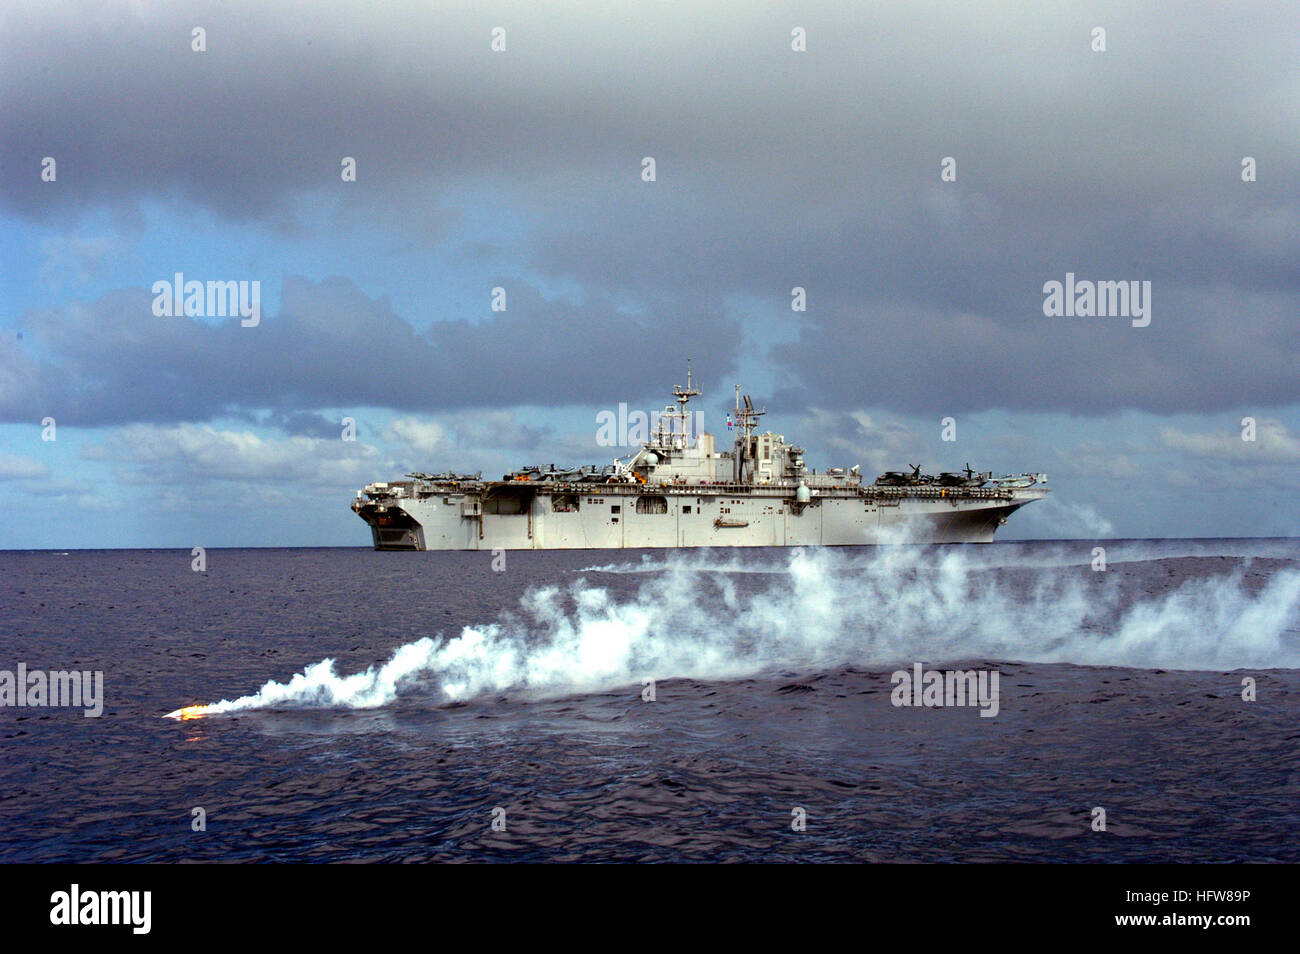 050613-N-6482W-034   Atlantic Ocean (June 13, 2005) - An MK-92 flare signals the approximate location of the search and rescue training aide, 'Oscar,' during a man overboard drill aboard the amphibious assault ship USS Bataan (LHD 5). Bataan is currently underway for the final test and evaluation period for the MV-22 Osprey tilt-rotor aircraft. U.S. Navy photo by Lithographer 3rd Class Justin S. Webster (RELEASED) US Navy 050613-N-6482W-034 An MK-92 flare signals the approximate location of the search and rescue training aide, Oscar, during a man overboard drill Stock Photo